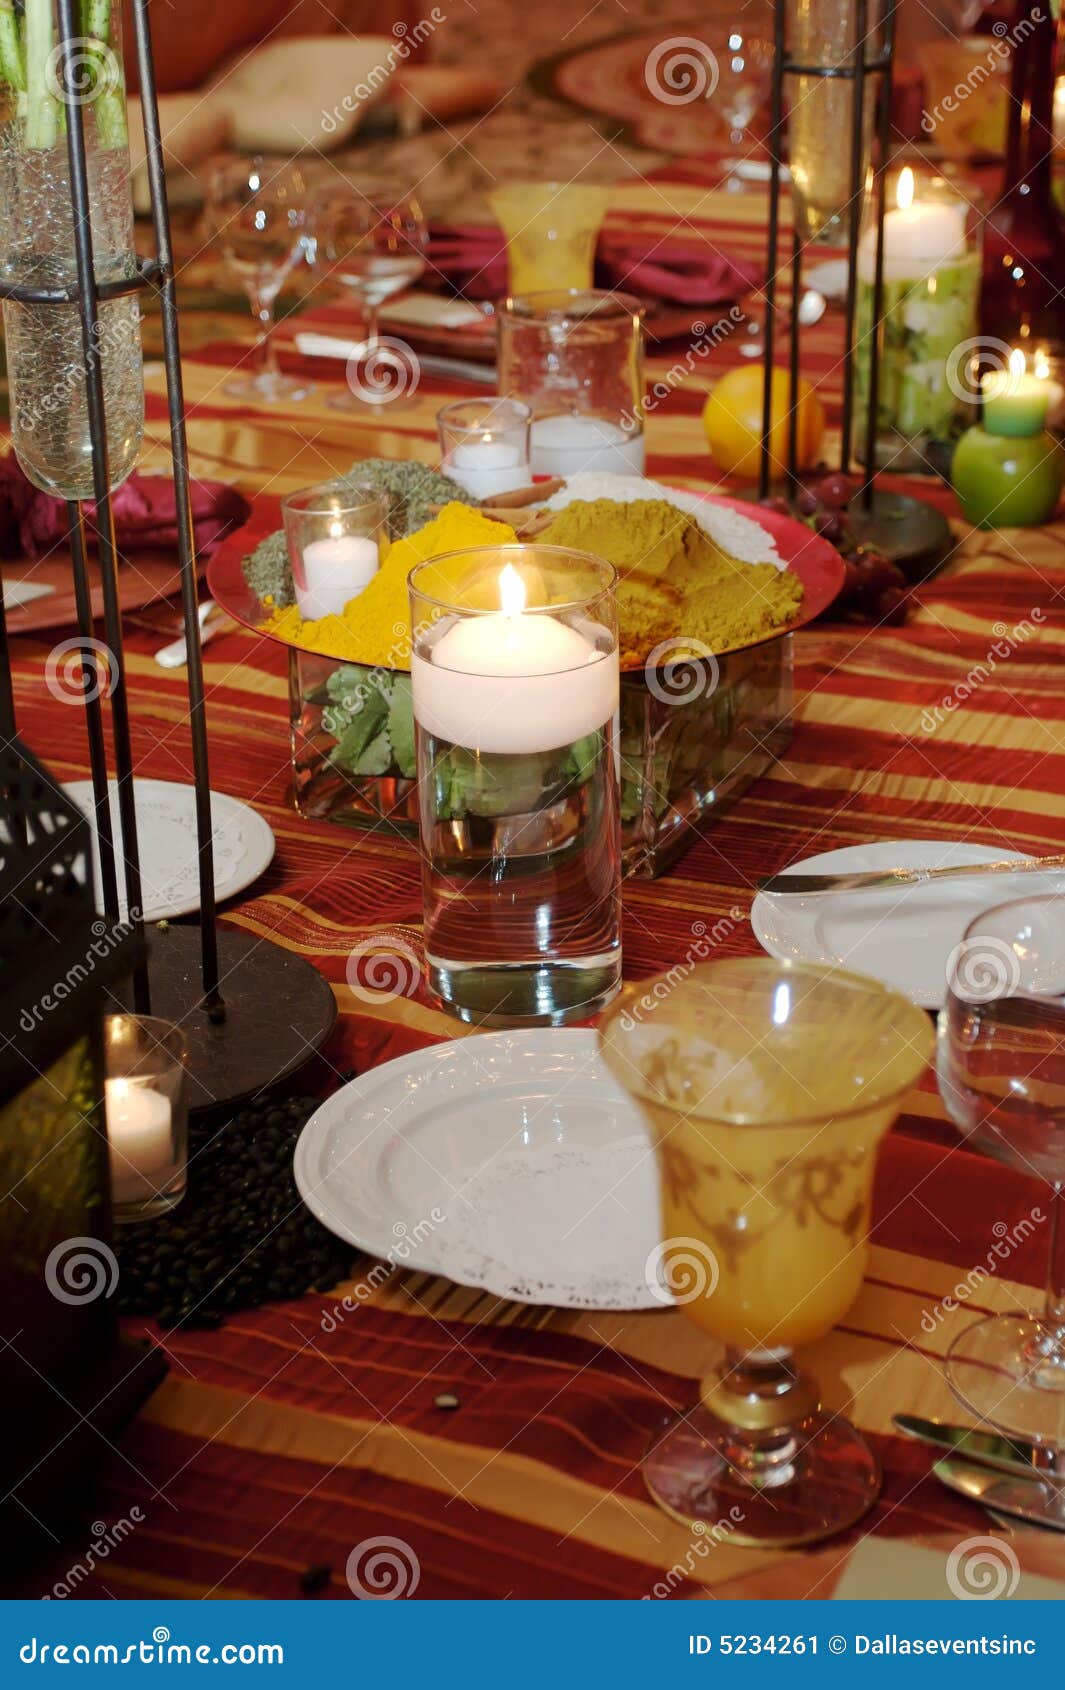 Table Setting at a Luxury Wedding Reception Stock Image - Image of ...